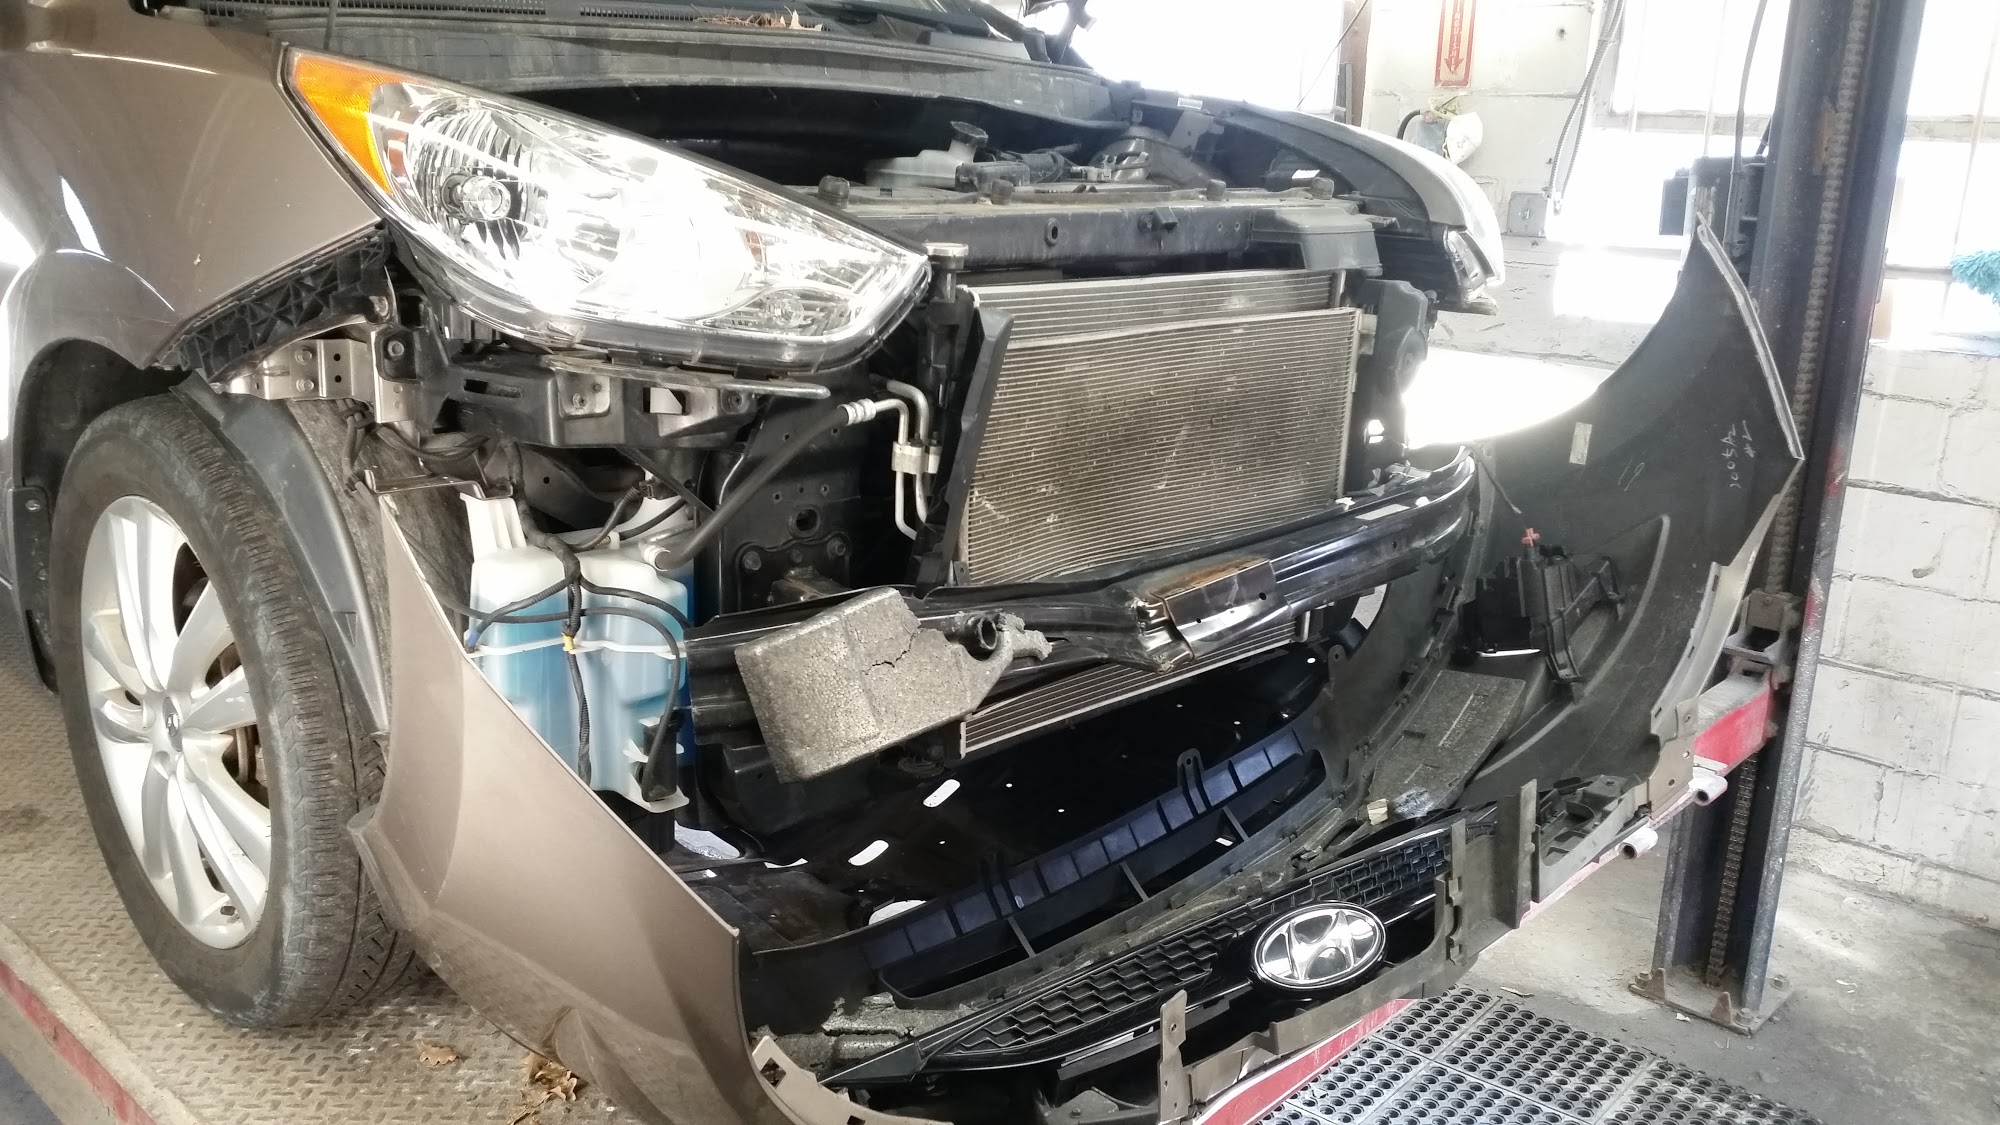 Sunwave Auto Repair and Body Works